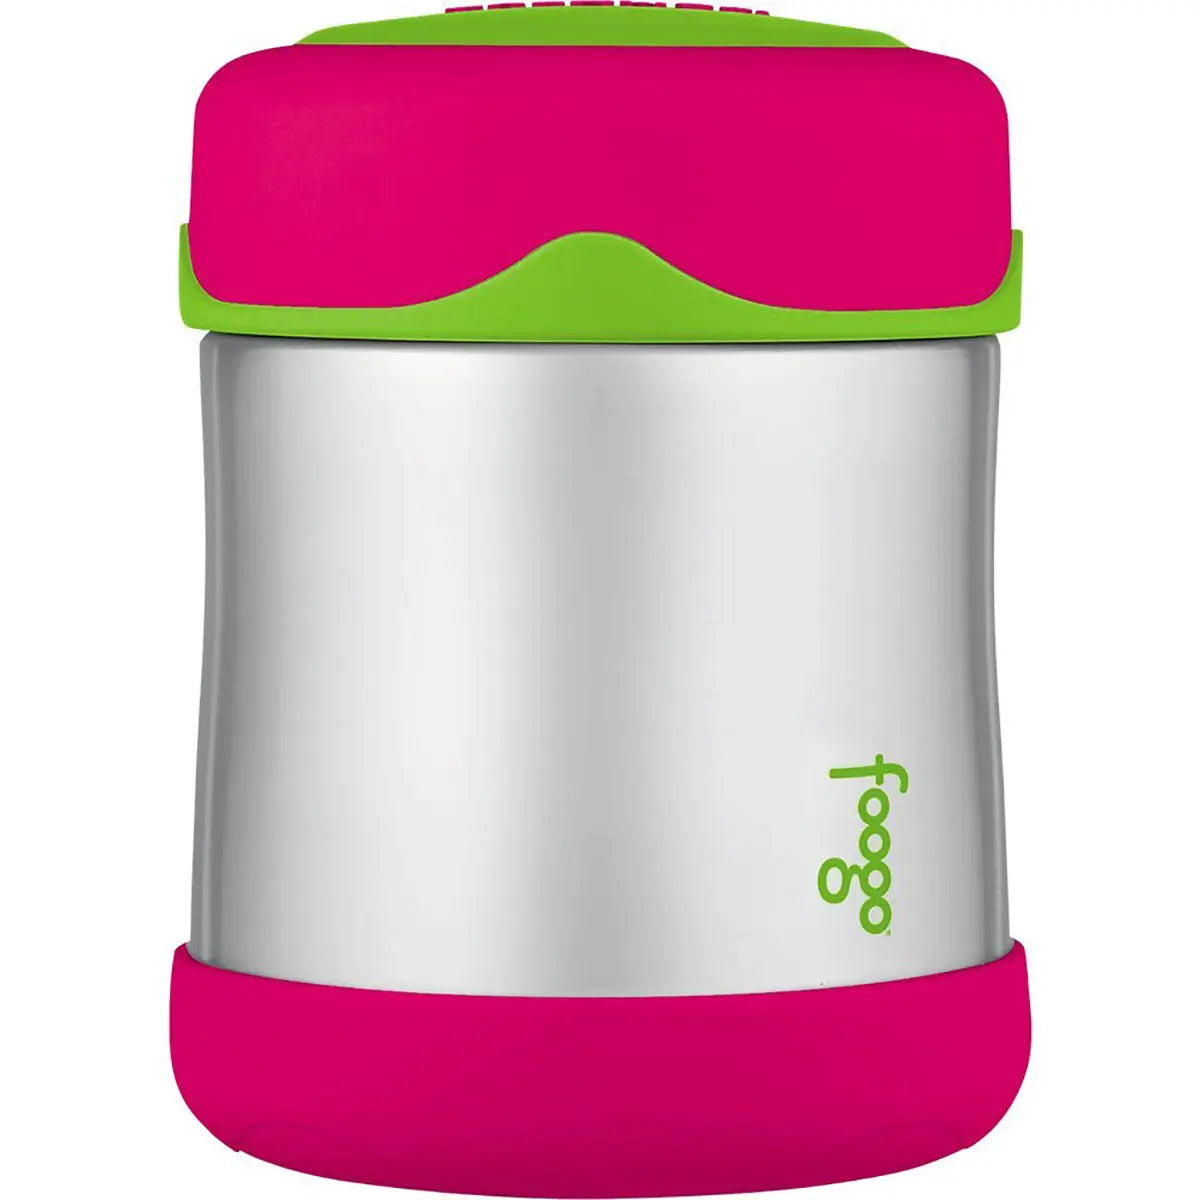 Thermos 10 oz. Kid's Foogo Insulated Stainless Steel Food Jar - Watermelon/Green Thermos